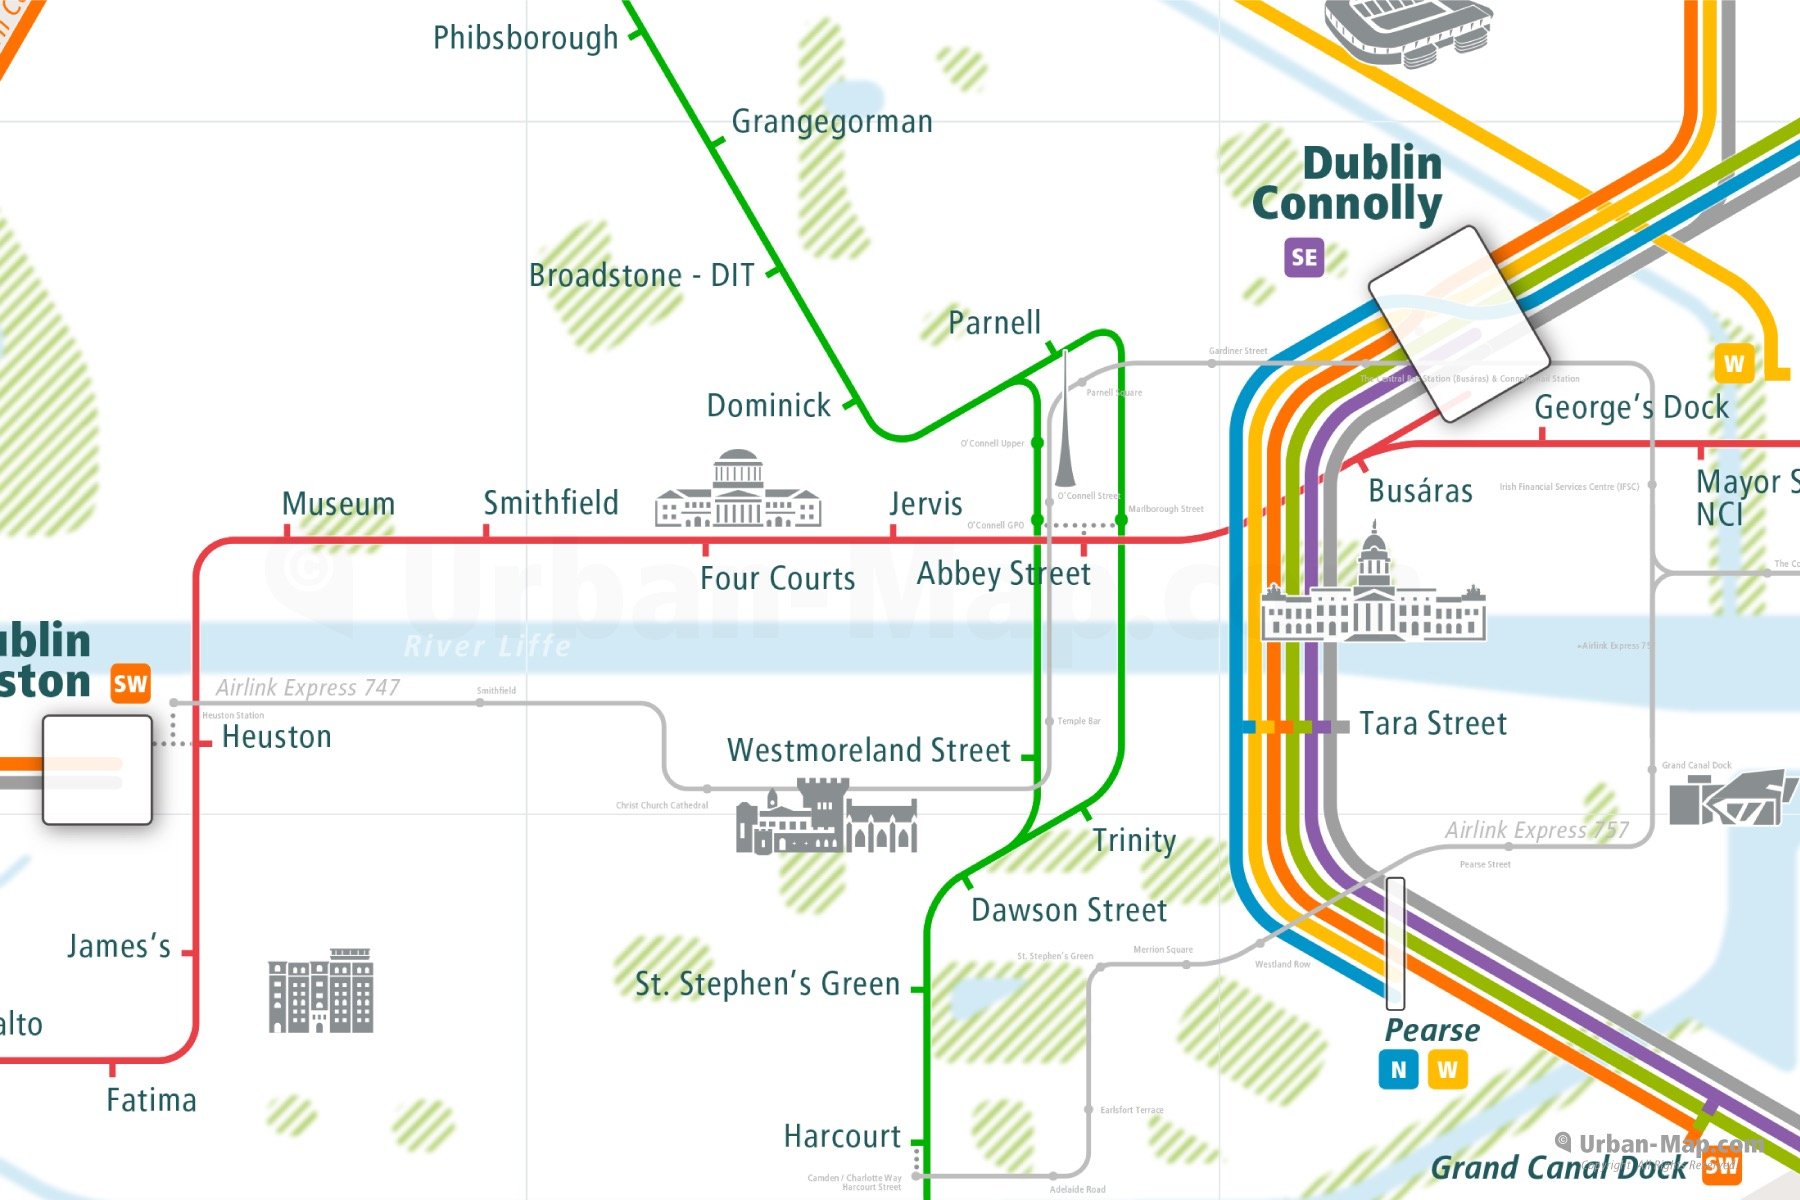 Dublin City Rail Map shows the train and public transportation routes of tram, Airlink Express, commuter train - Close-Up